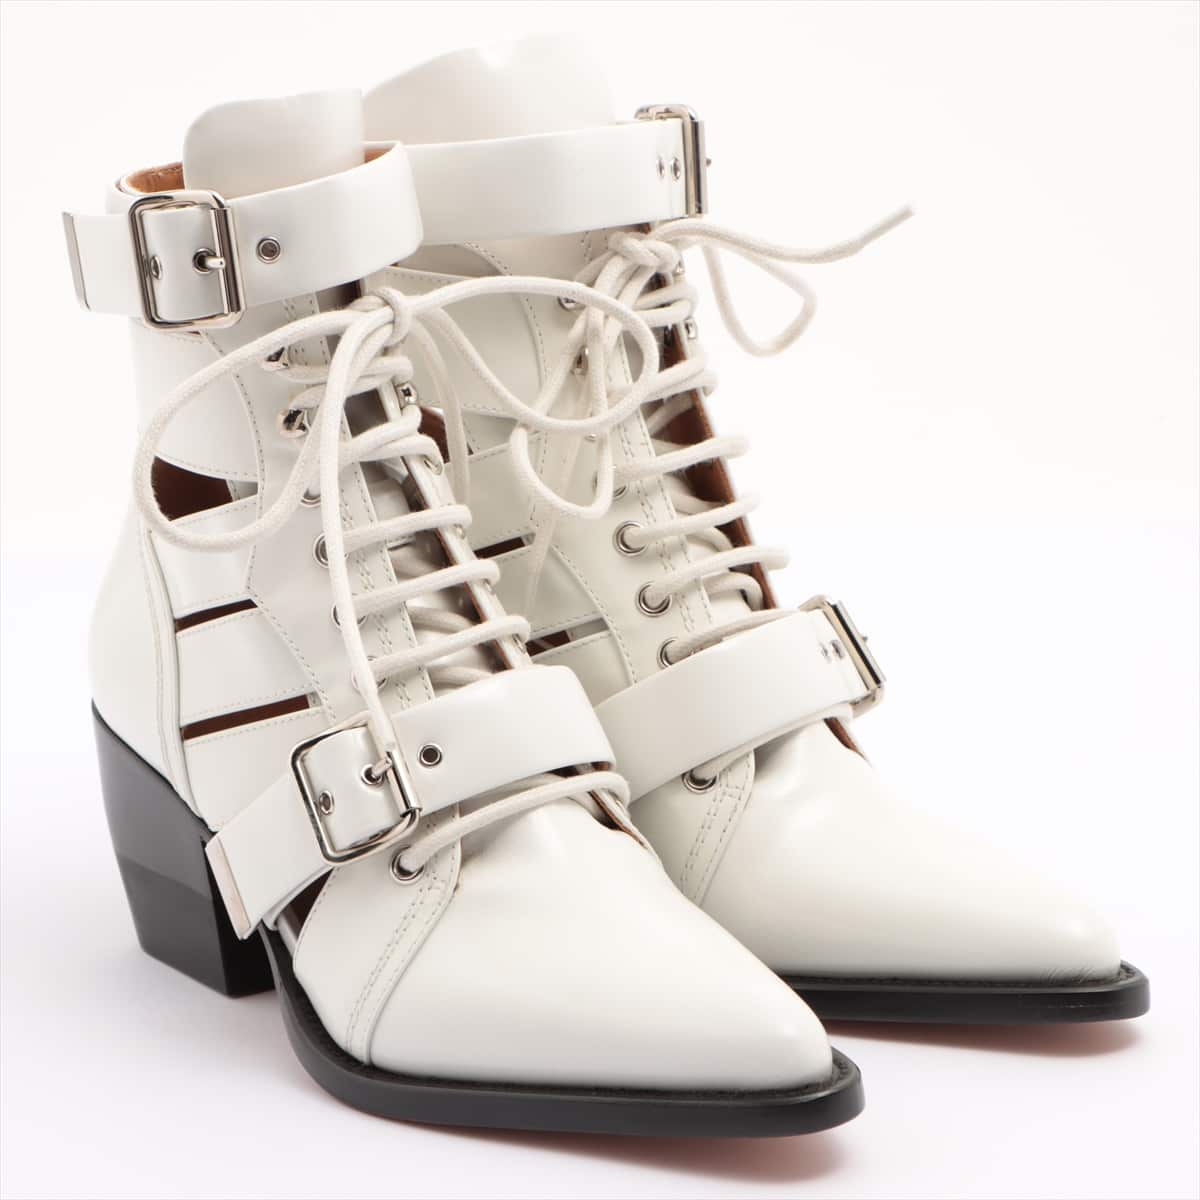 Chloe RYLEE Leather Boots 38 Ladies' White